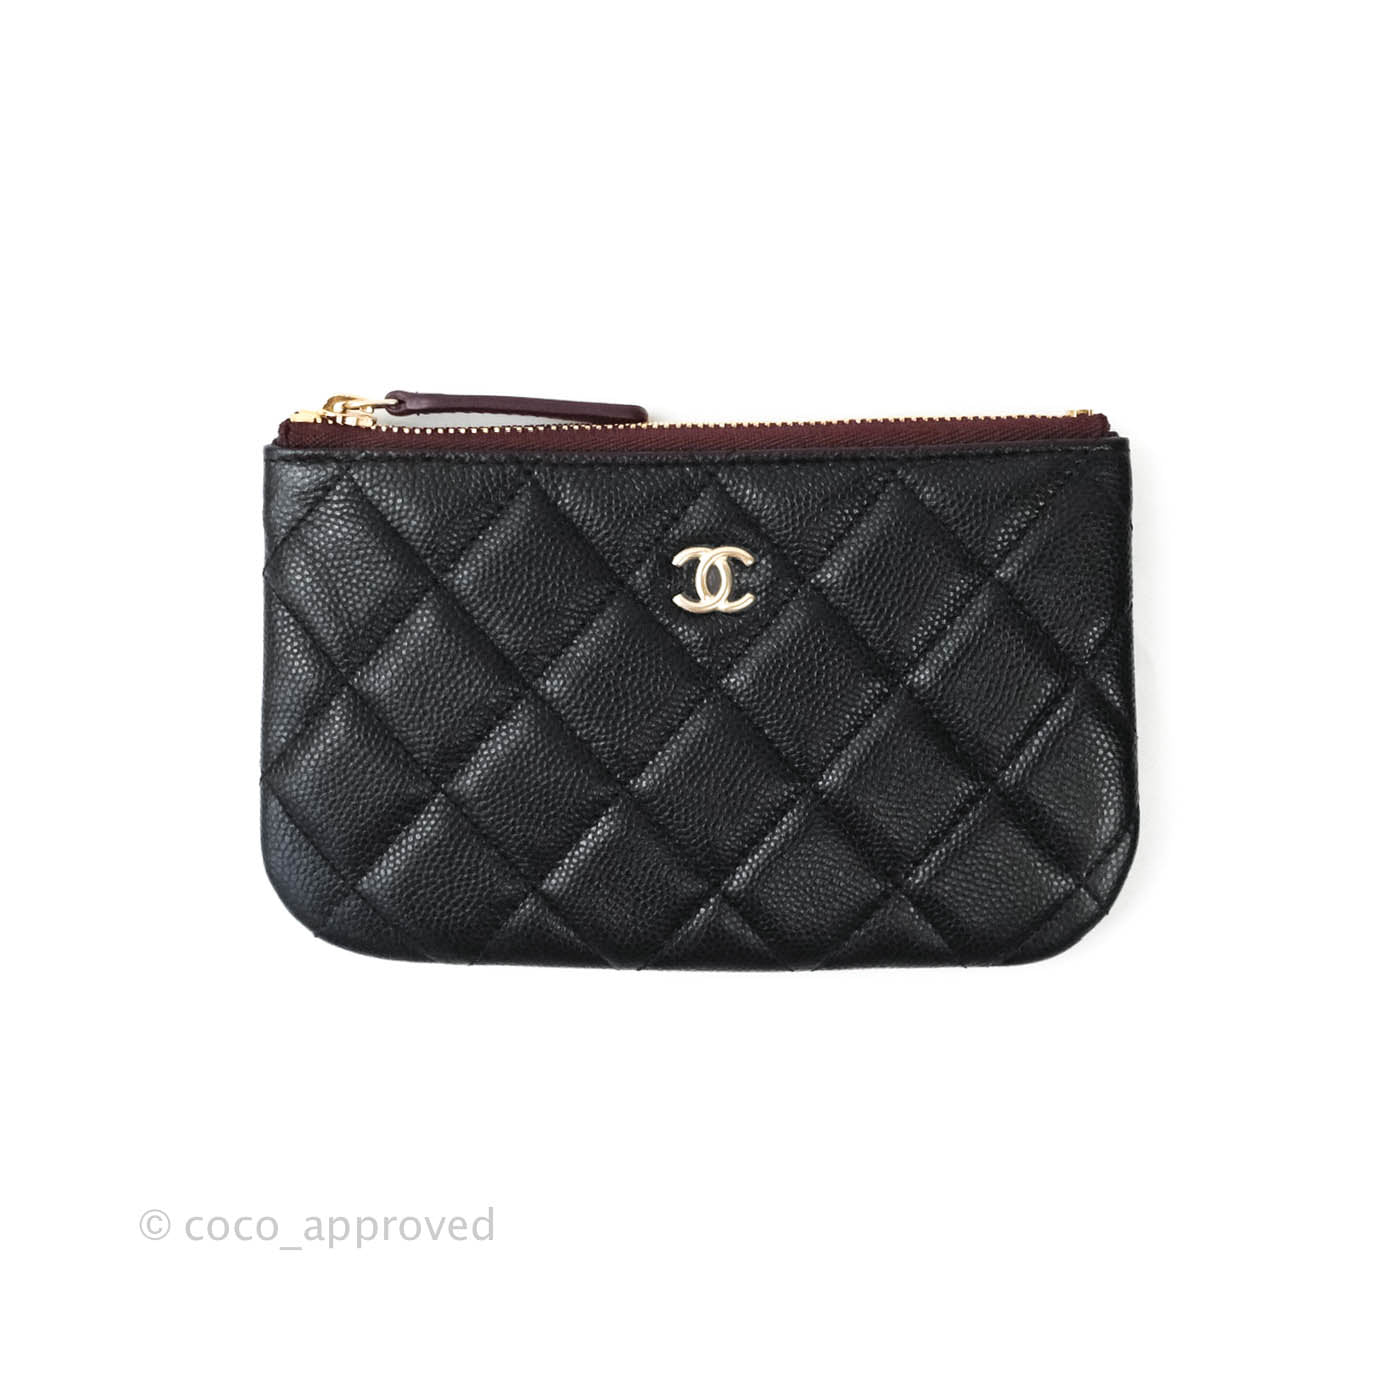 Chanel Black Caviar Leather Mini O Case Zip Pouch For Sale at